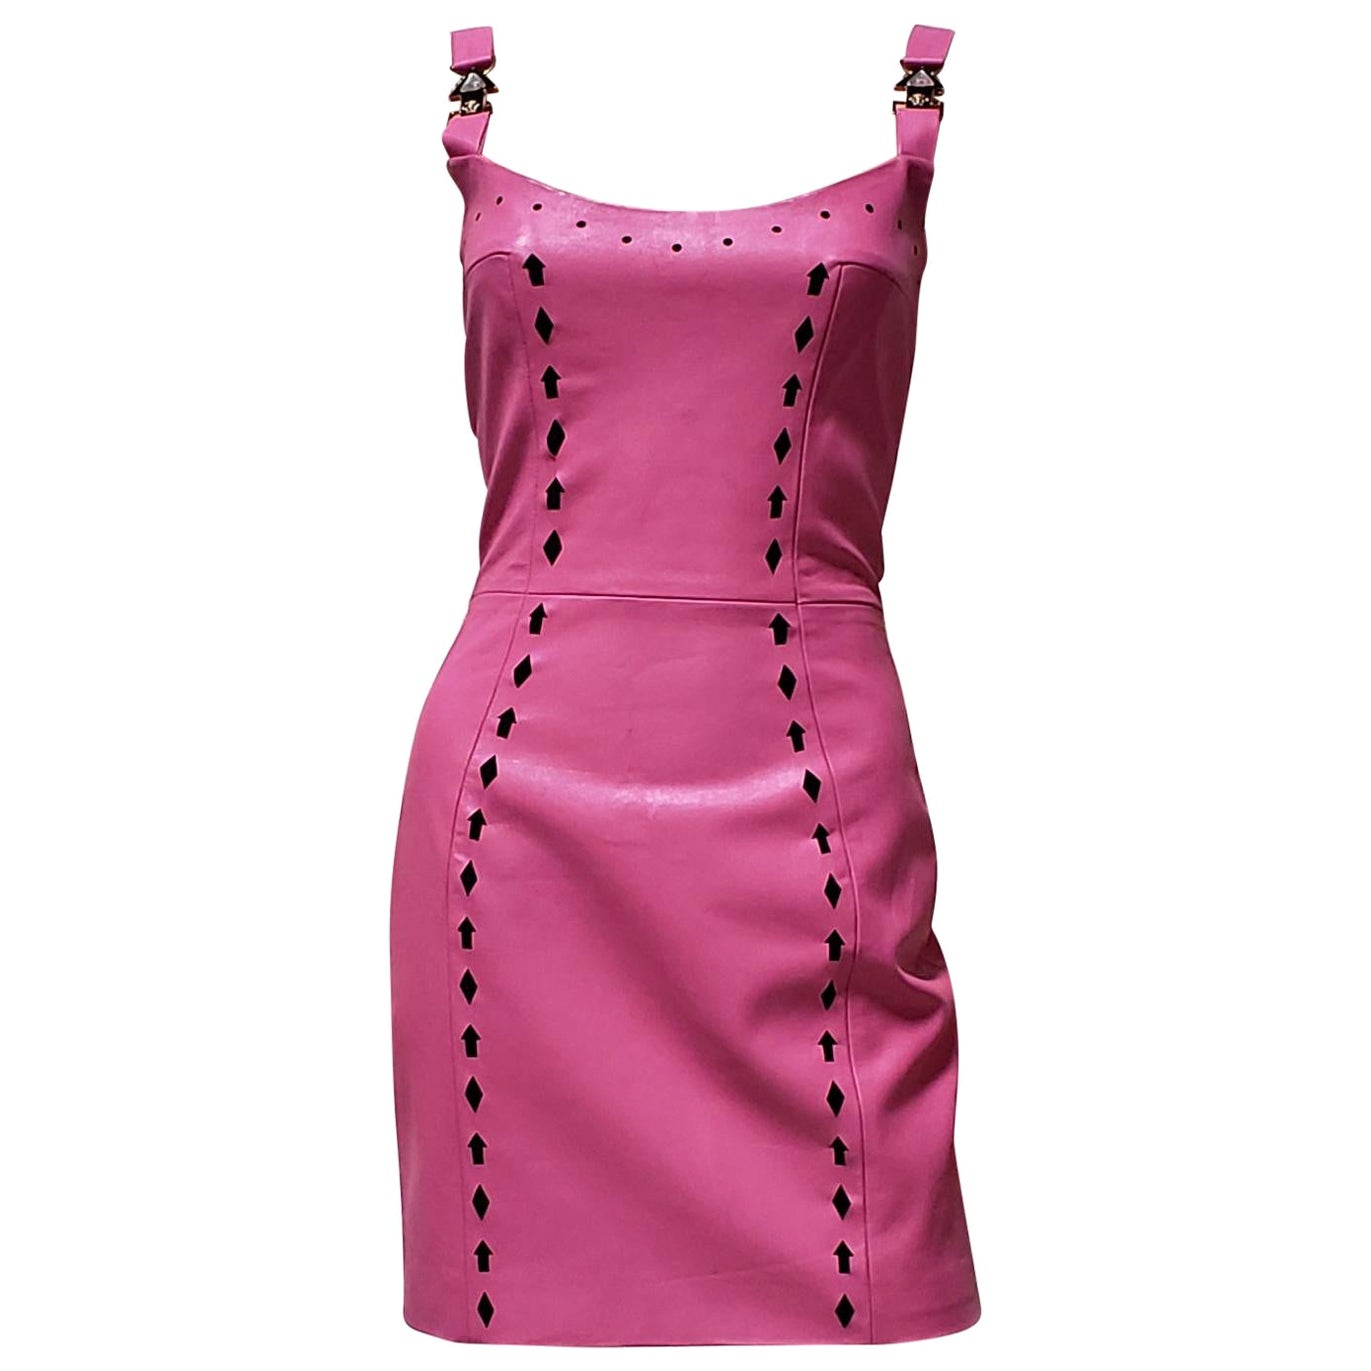 Resort 2013 look # 9 NEW VERSACE PINK LEATHER MINI DRESS 38 - 2 For Sale